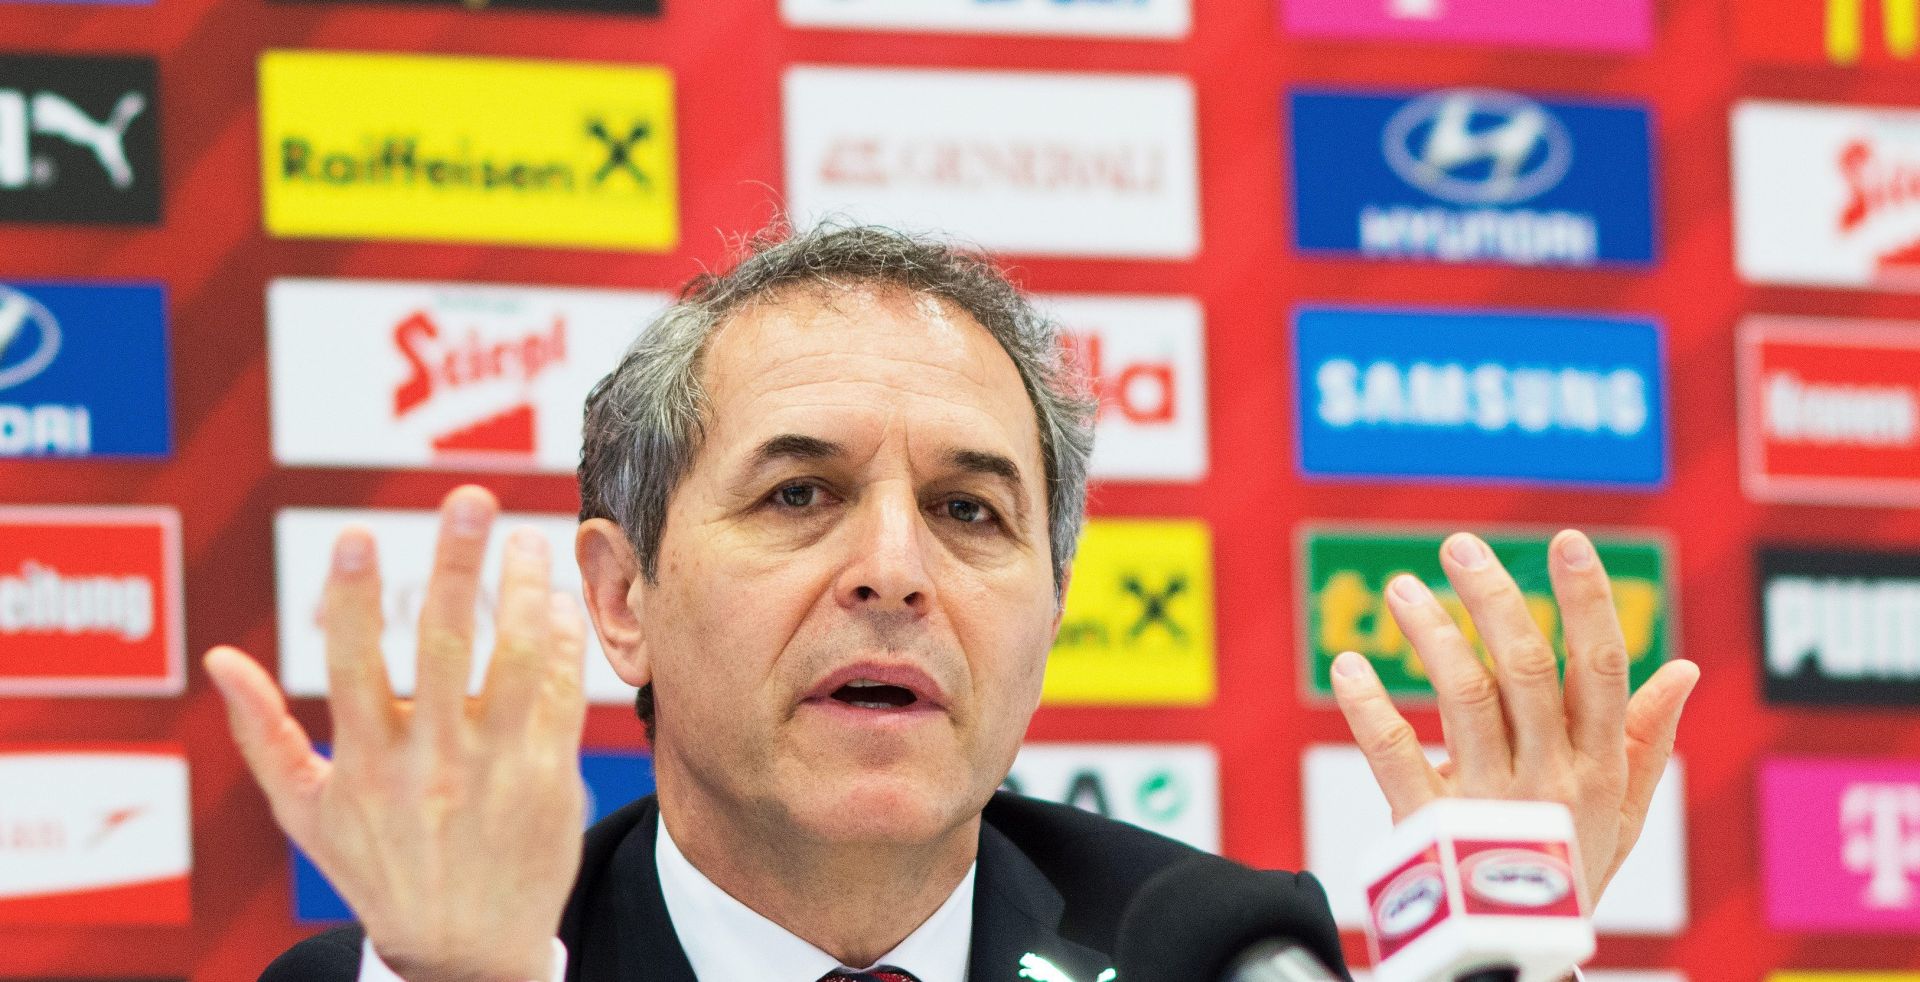 epa05301002 Austrian national soccer team's Swiss head coach Marcel Koller gestures during a press conference in Vienna, Austria, 12 May 2016. Koller announced the Austrian squad for the UEFA EURO 2016 soccer championship in France.  EPA/CHRISTIAN BRUNA